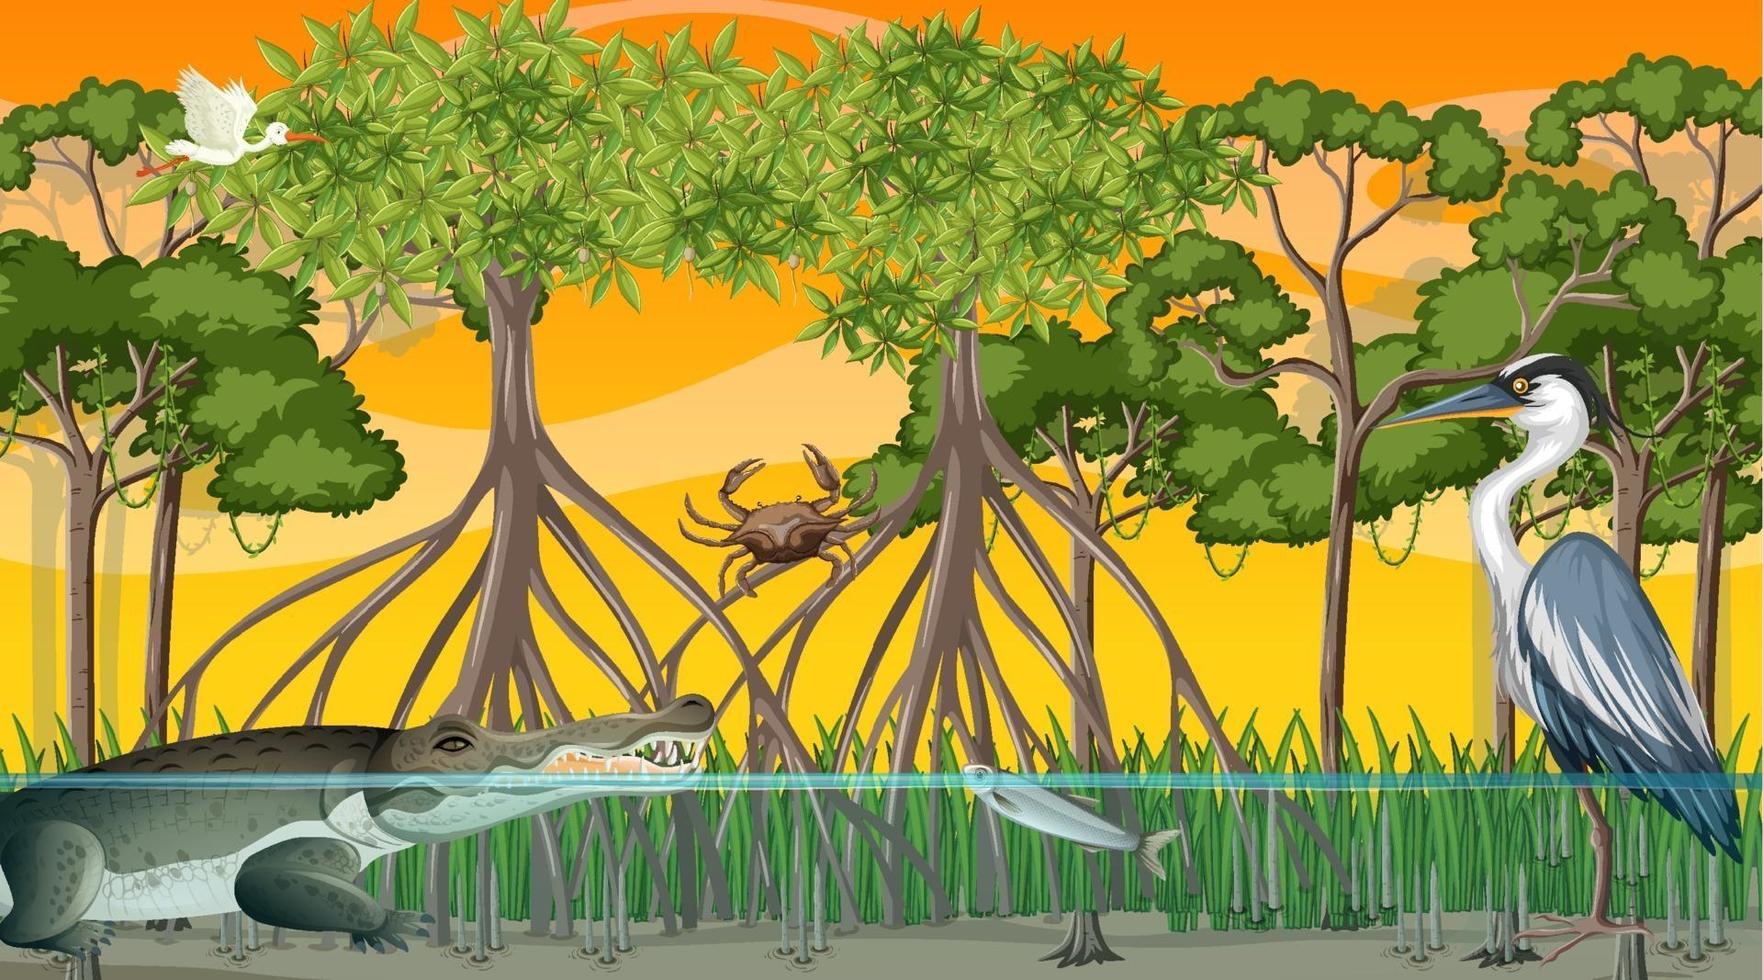 Animals live in Mangrove forest at sunset time scene vector